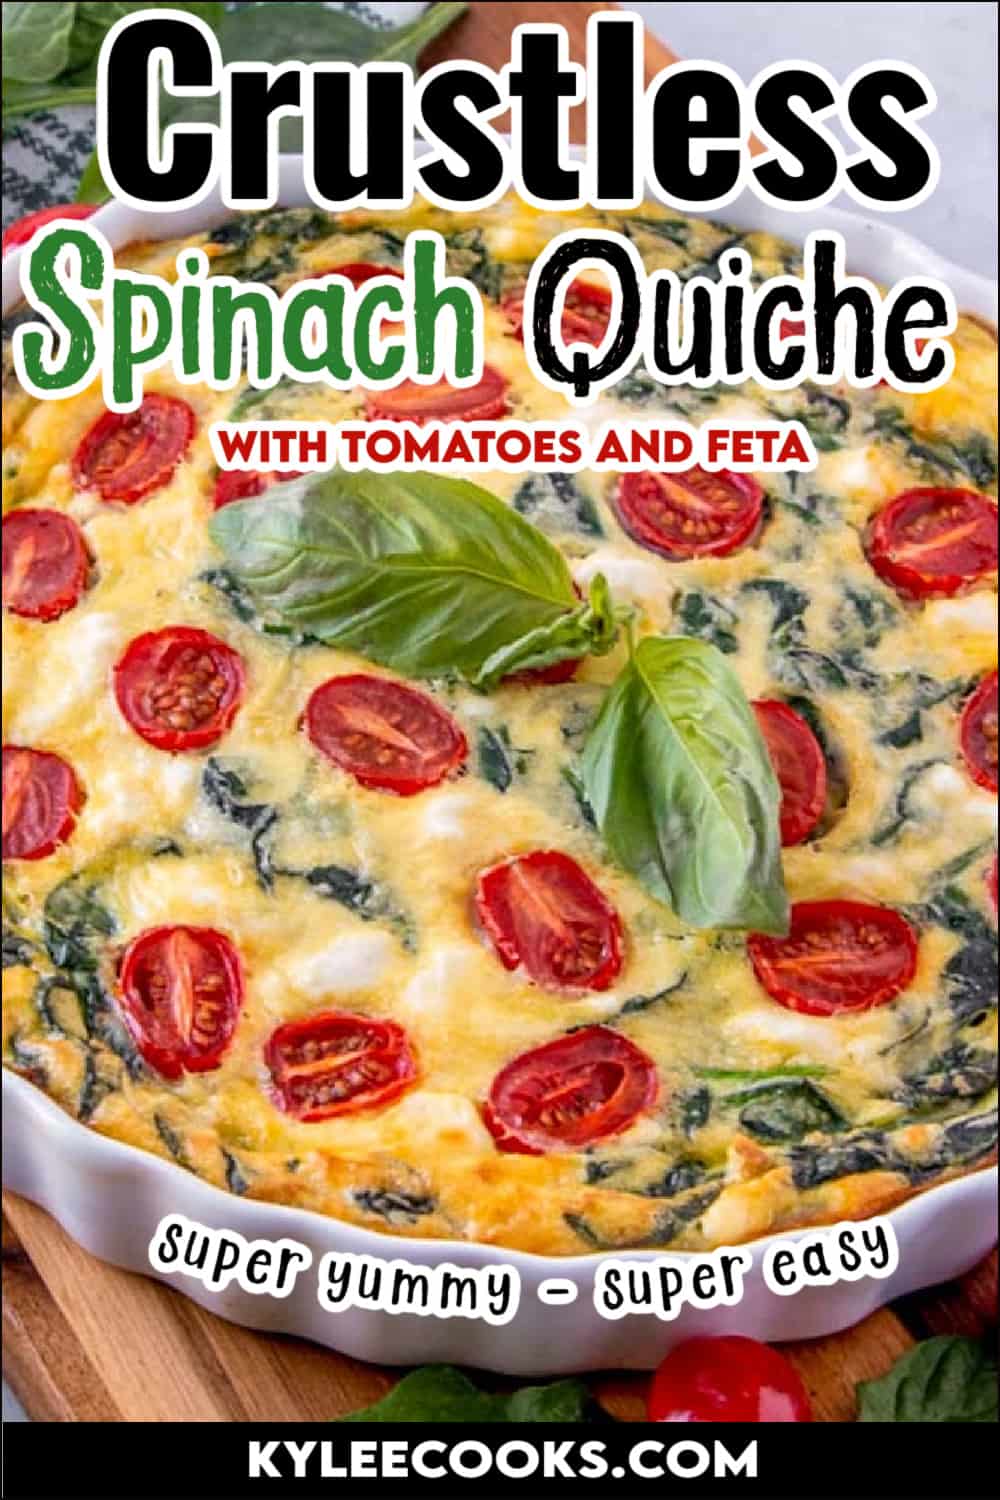 Fresh spinach is the star of the show in this Crustless Spinach Quiche recipe with tomatoes, onions, and feta. Delicious warm, room temperature, or chilled - this is a fantastic brunch, lunch or light dinner!